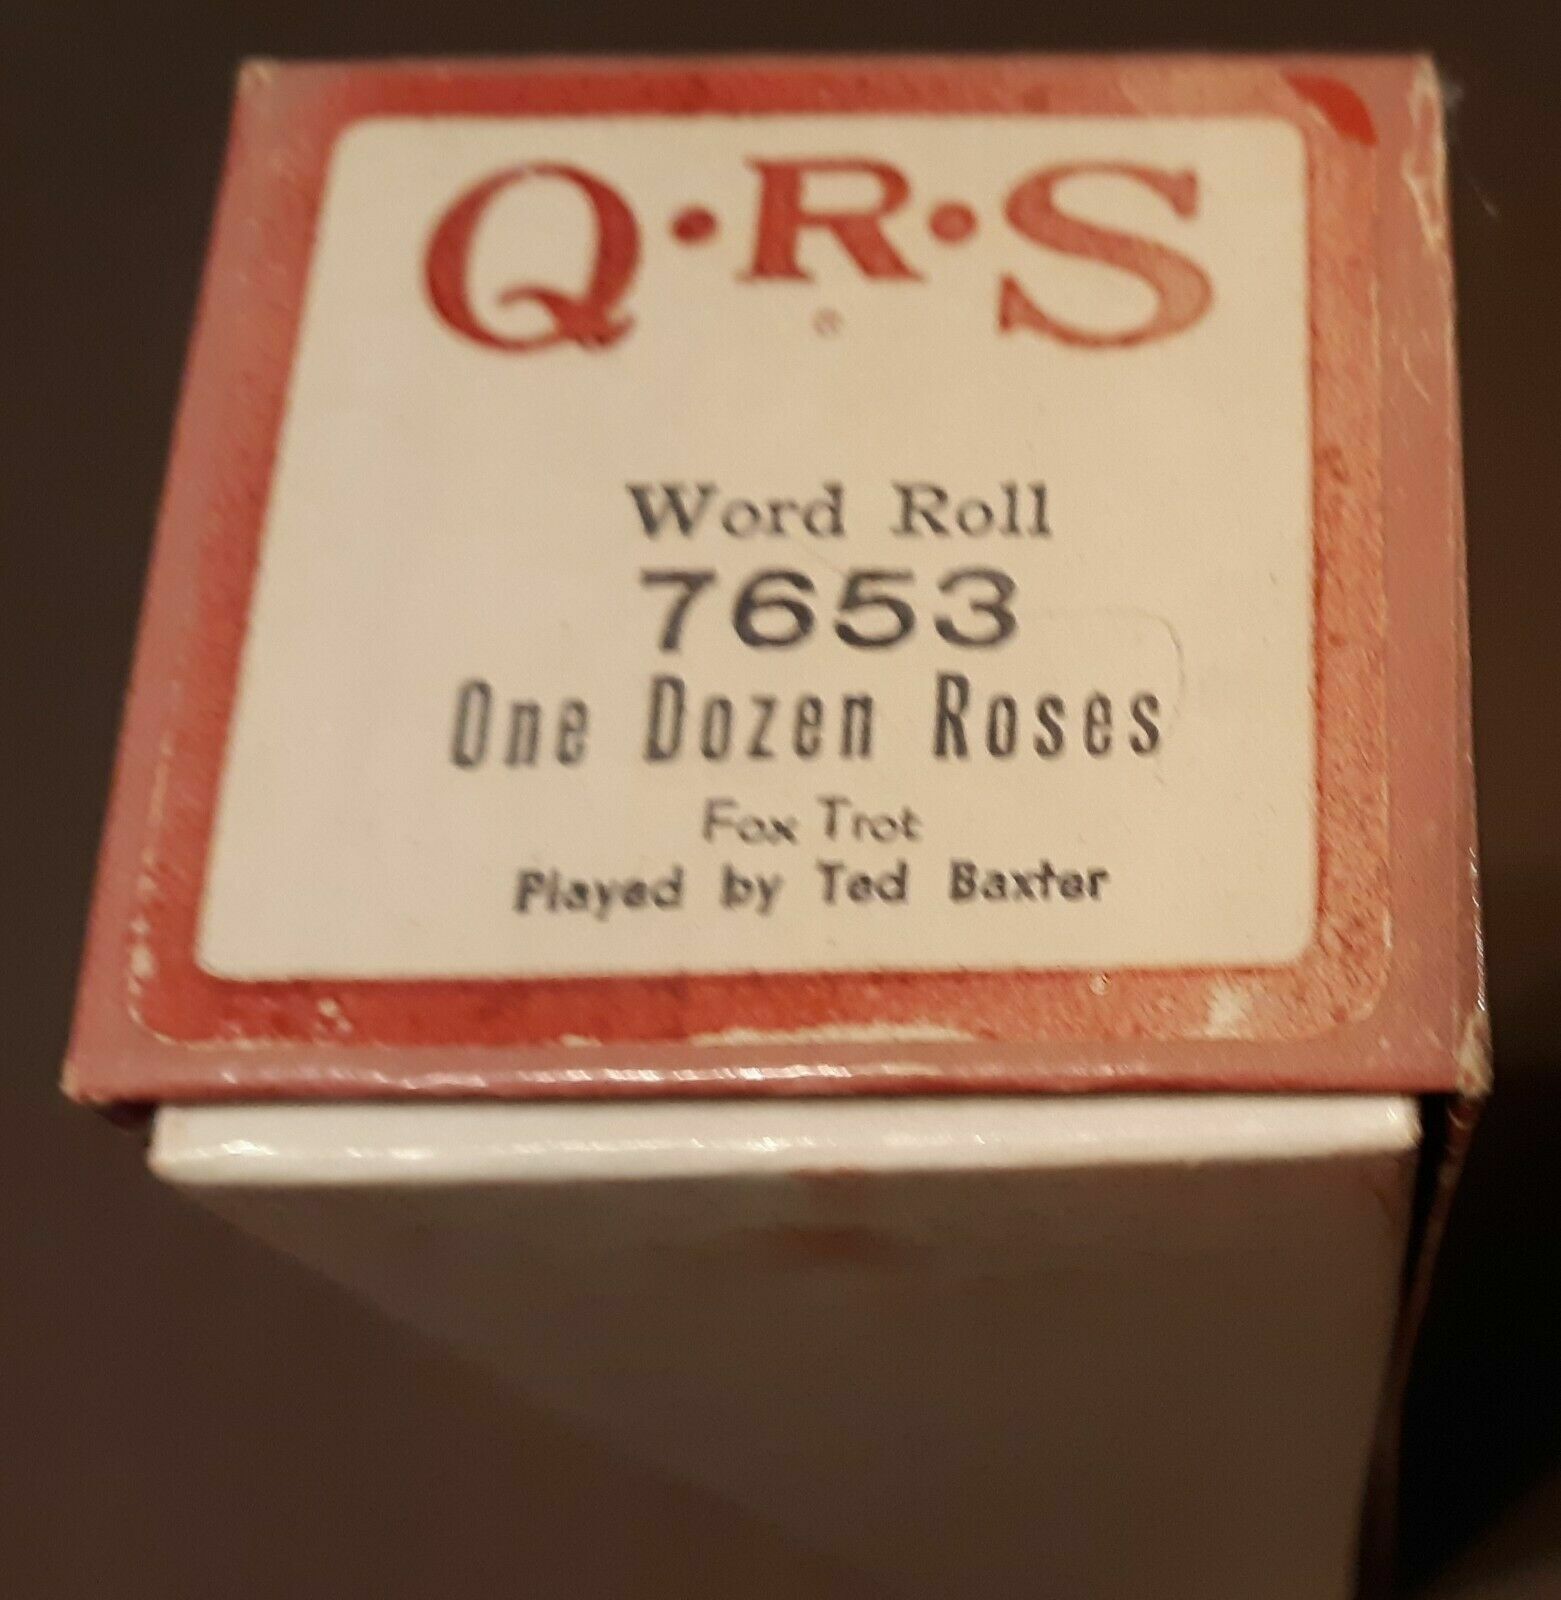 #7653 Super sale period limited One Dozen Roses fox trot by Ted Excellence Baxter Note 88 Piano QRS Player Word Roll